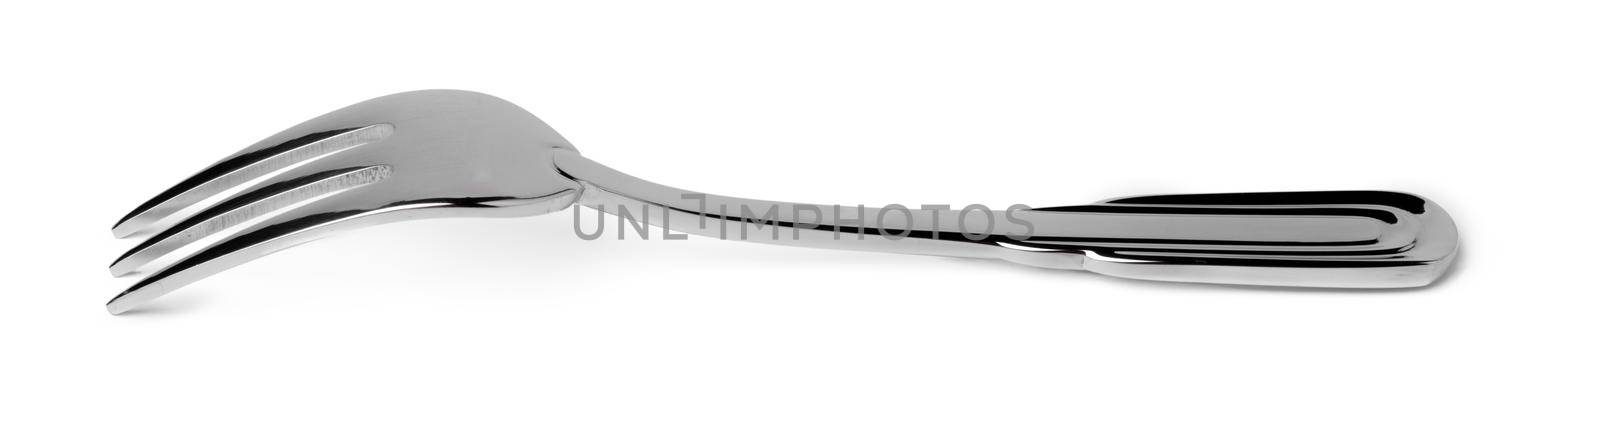 Steel metal fork isolated on white background, cutlery